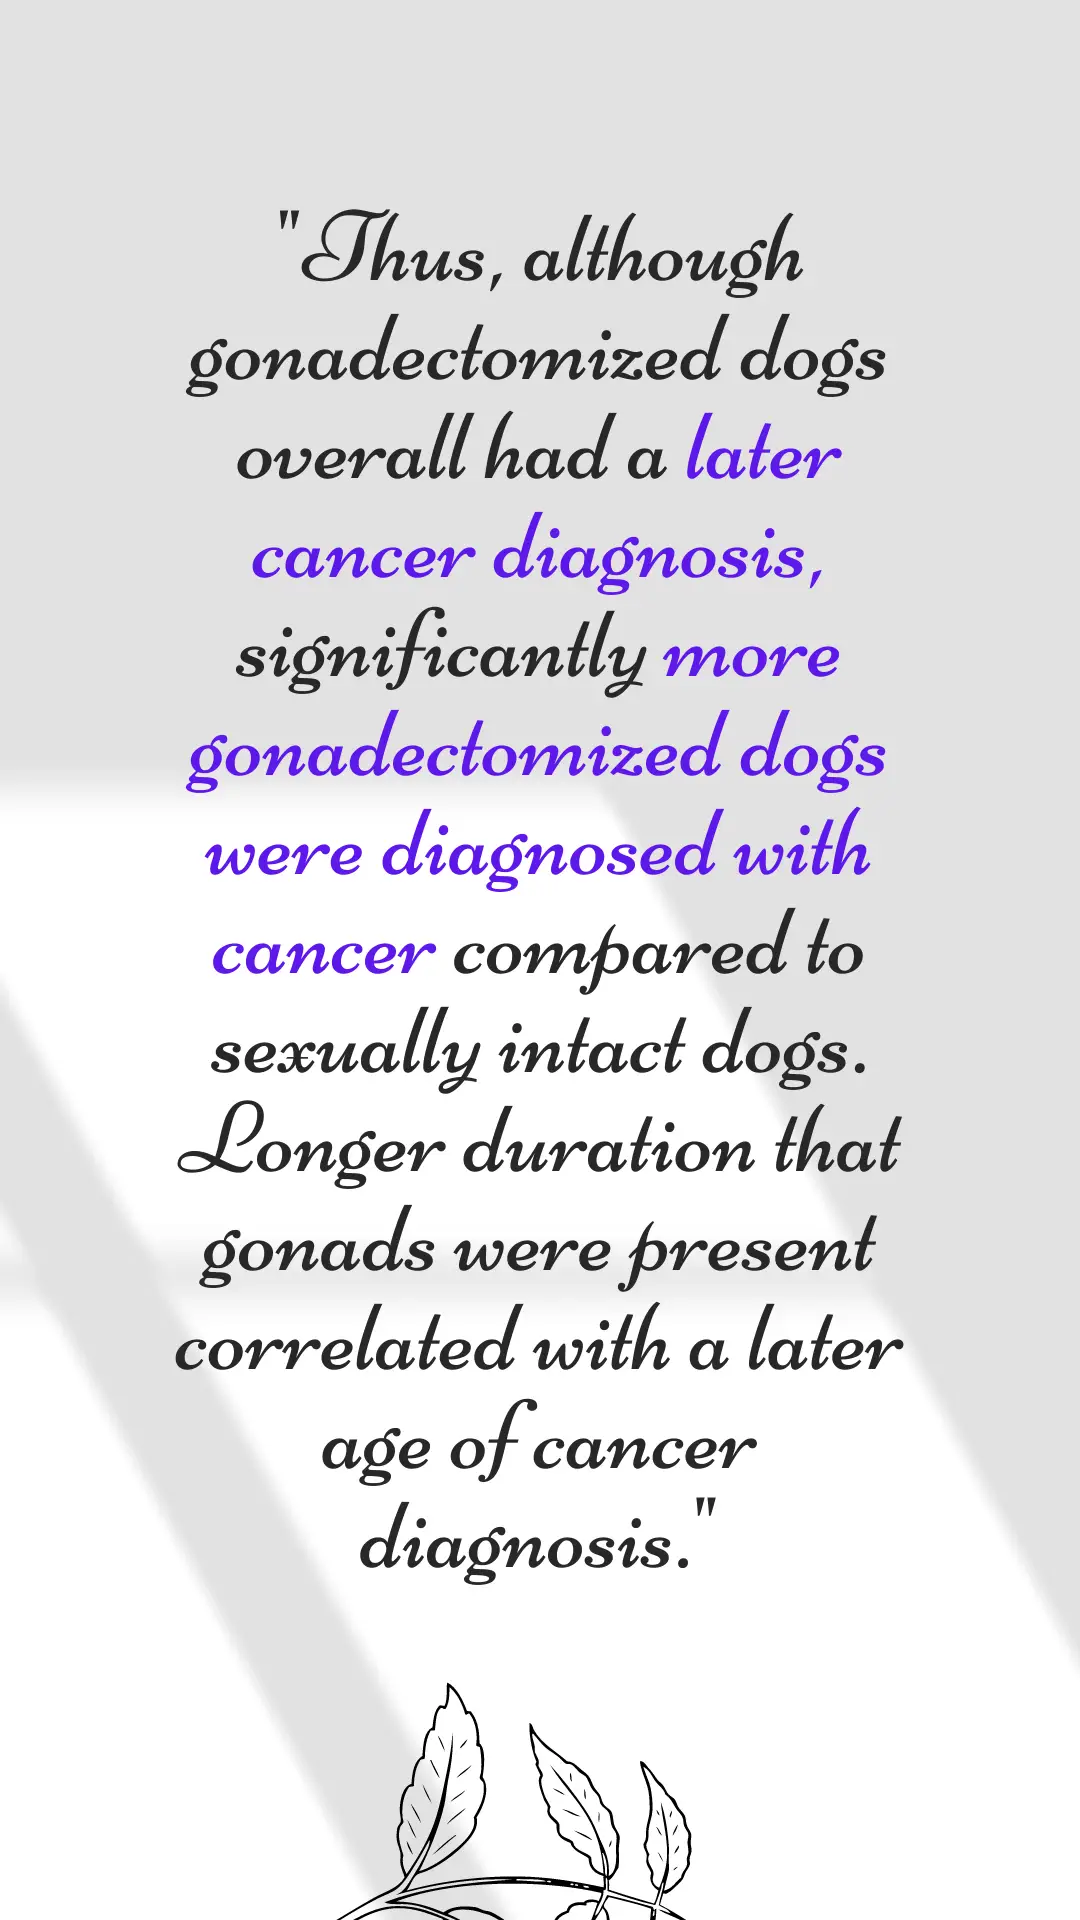 dog vasectomy and ovary sparing spay quote from published study - the full text of the quote is below the image